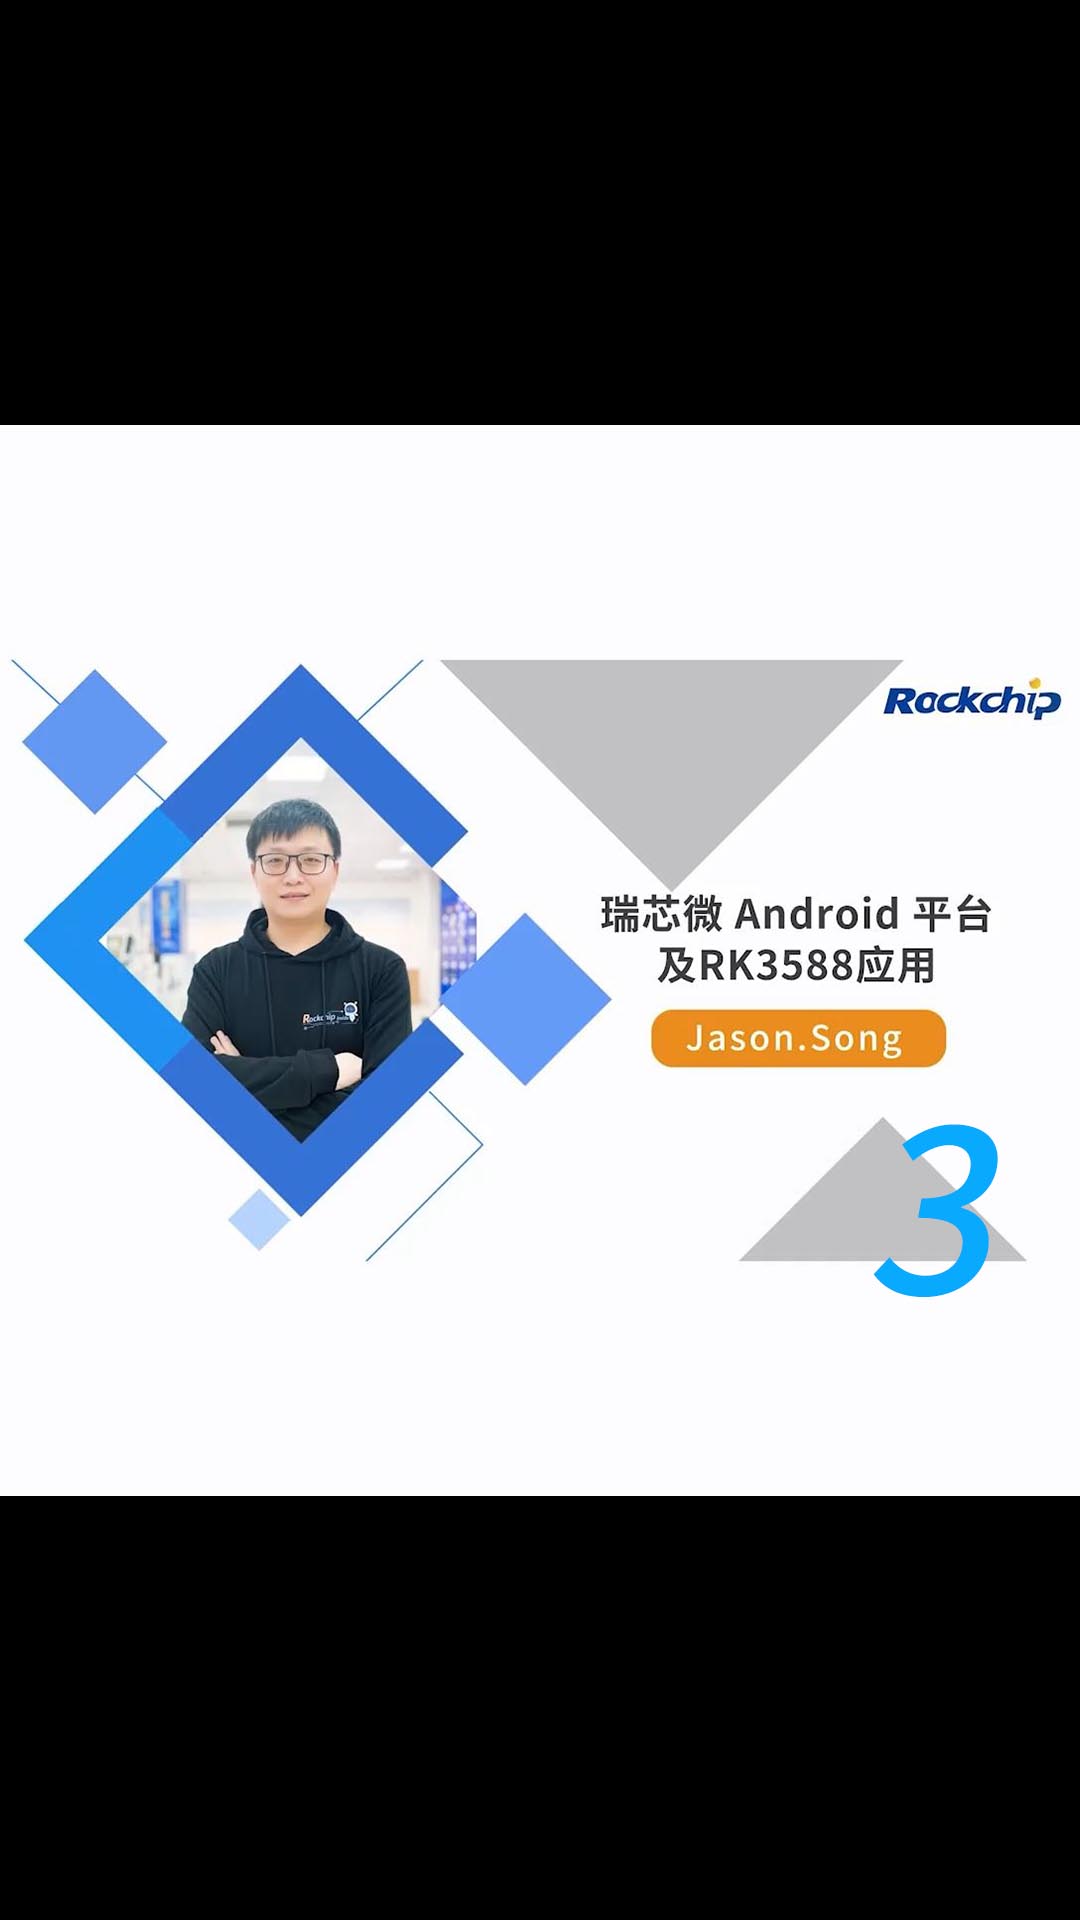 RK公开课】Android 平台及RK3588应用 - RKDC2021-3